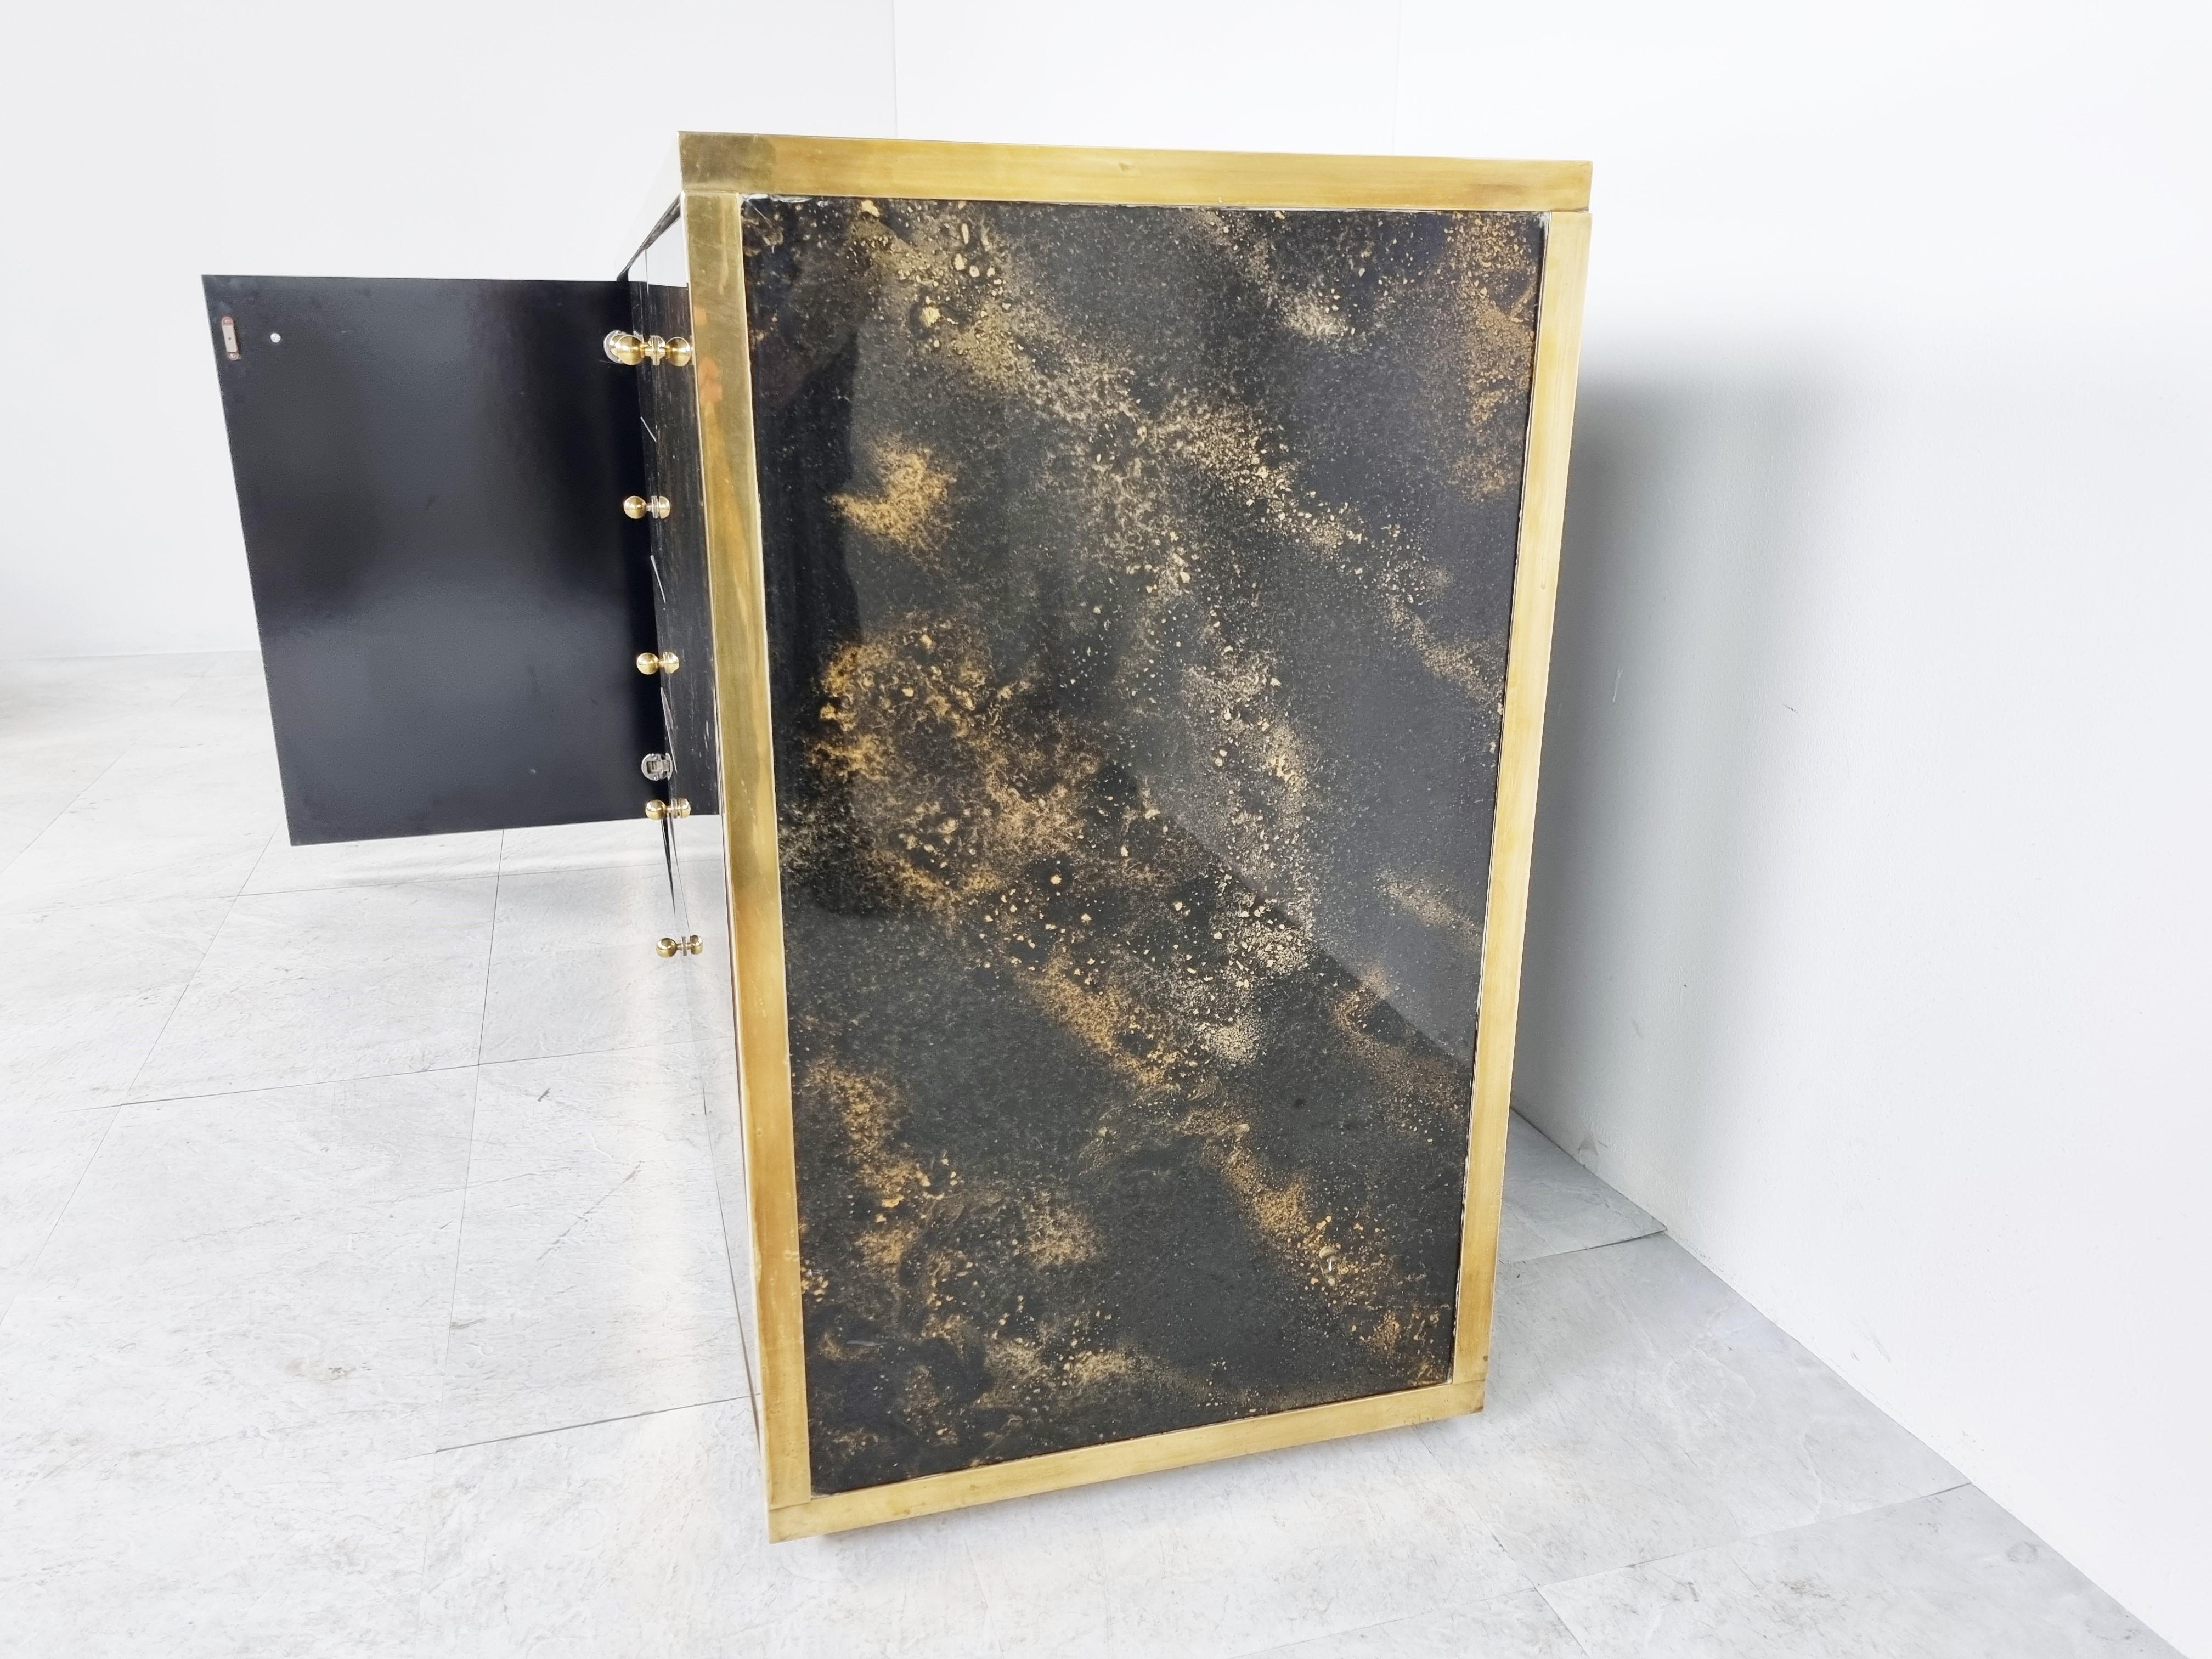 Luxurious seventies glamour sideboard by Maison Jansen consitsing of black lacquer panels with a beautiful gold flaked pattern and a patinated brass frame.

it has two doors and 5 central drawers.

Very eye ctaching piece

Good condition,